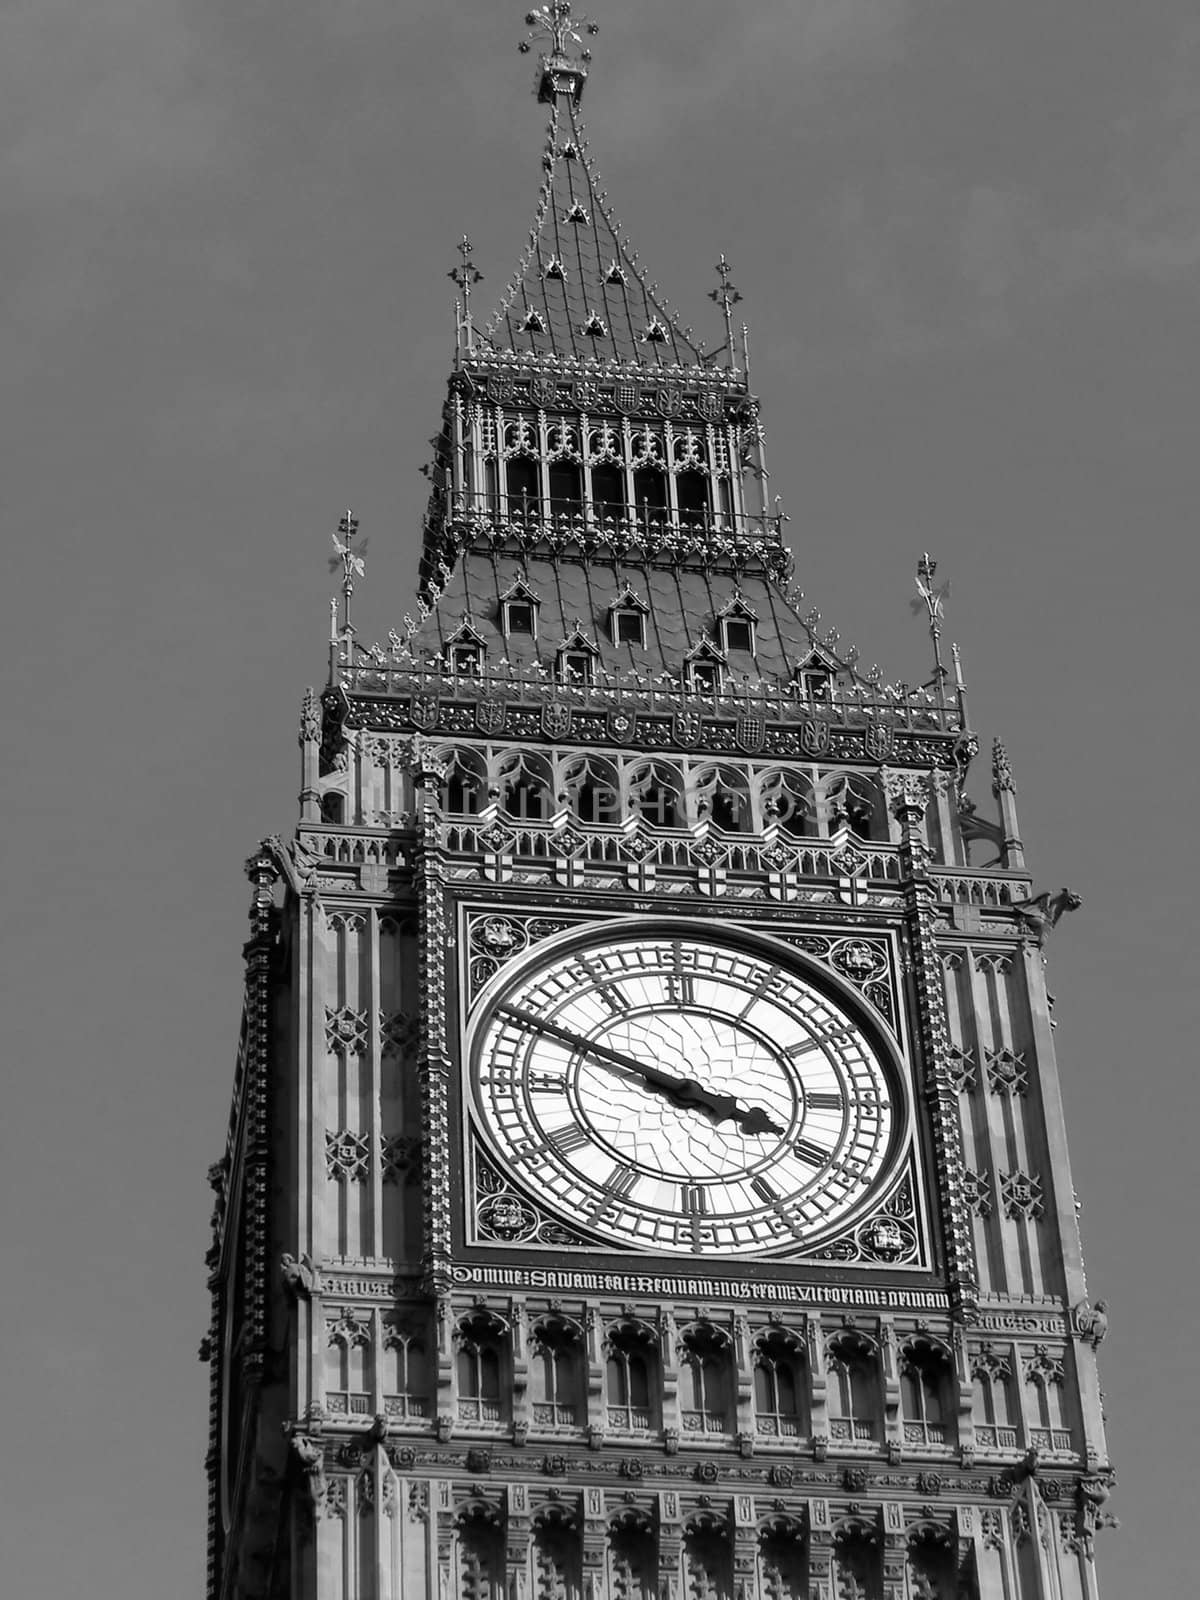 Big Ben London Houses of Parliament Westminster Palace